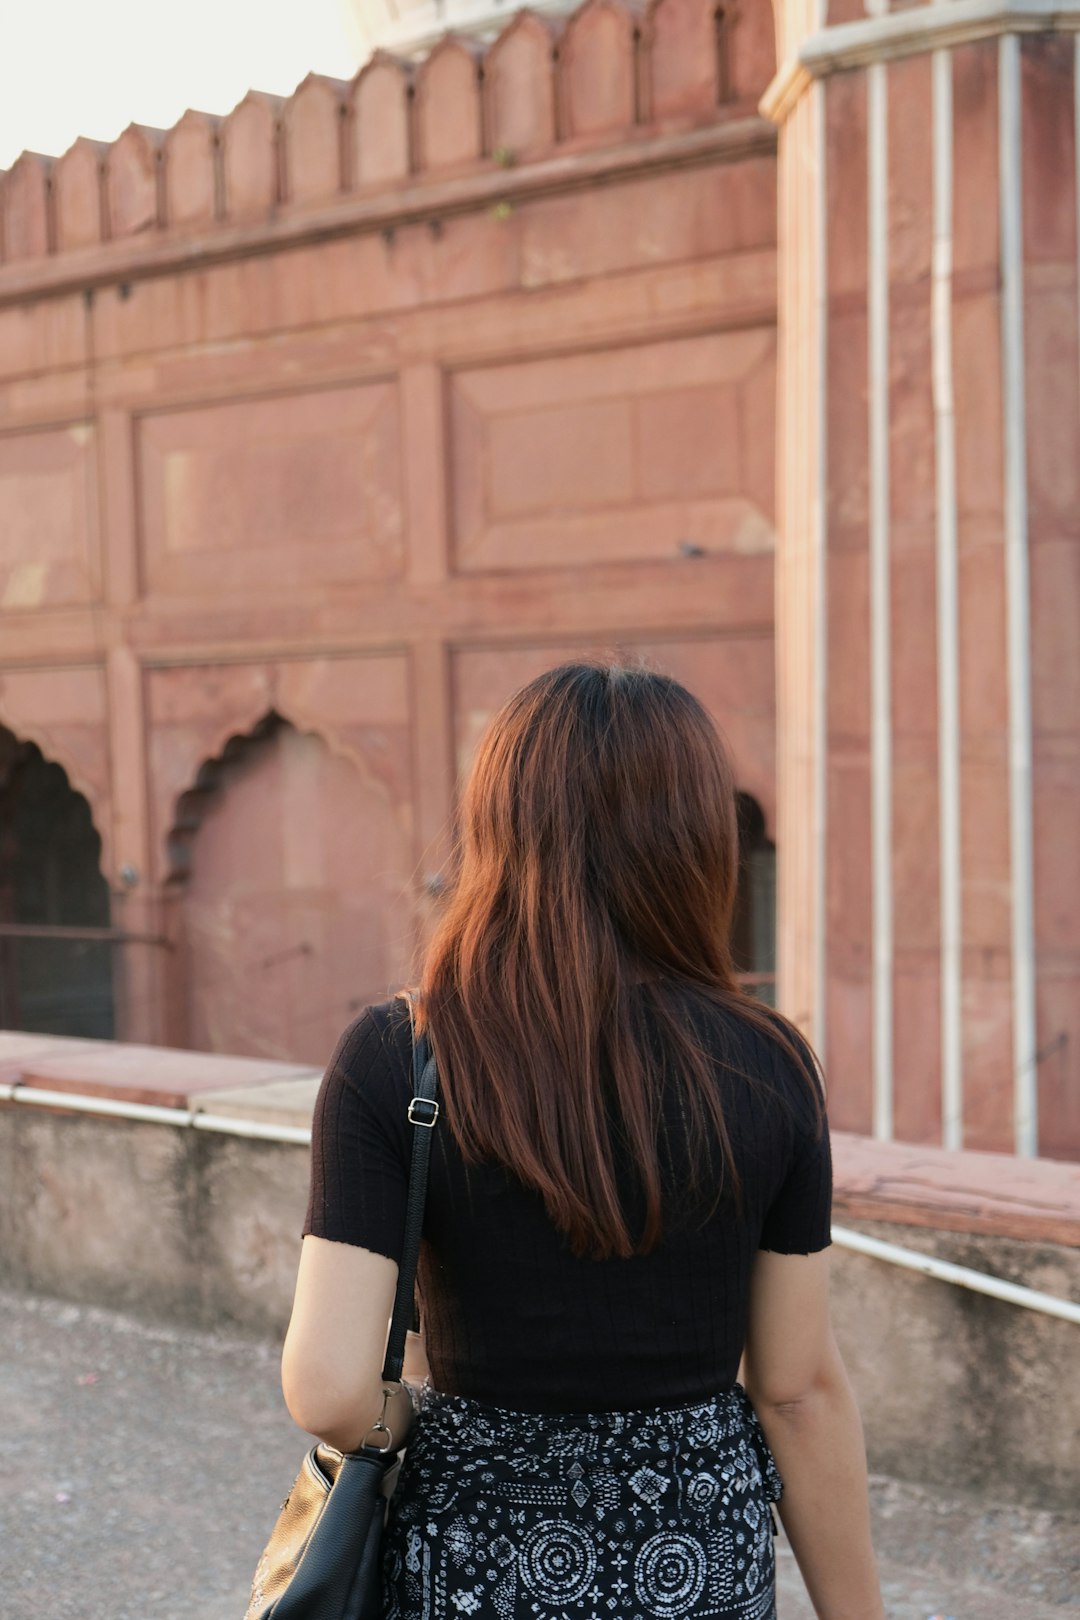 woman in black shirt standing near brown wooden wall during daytime